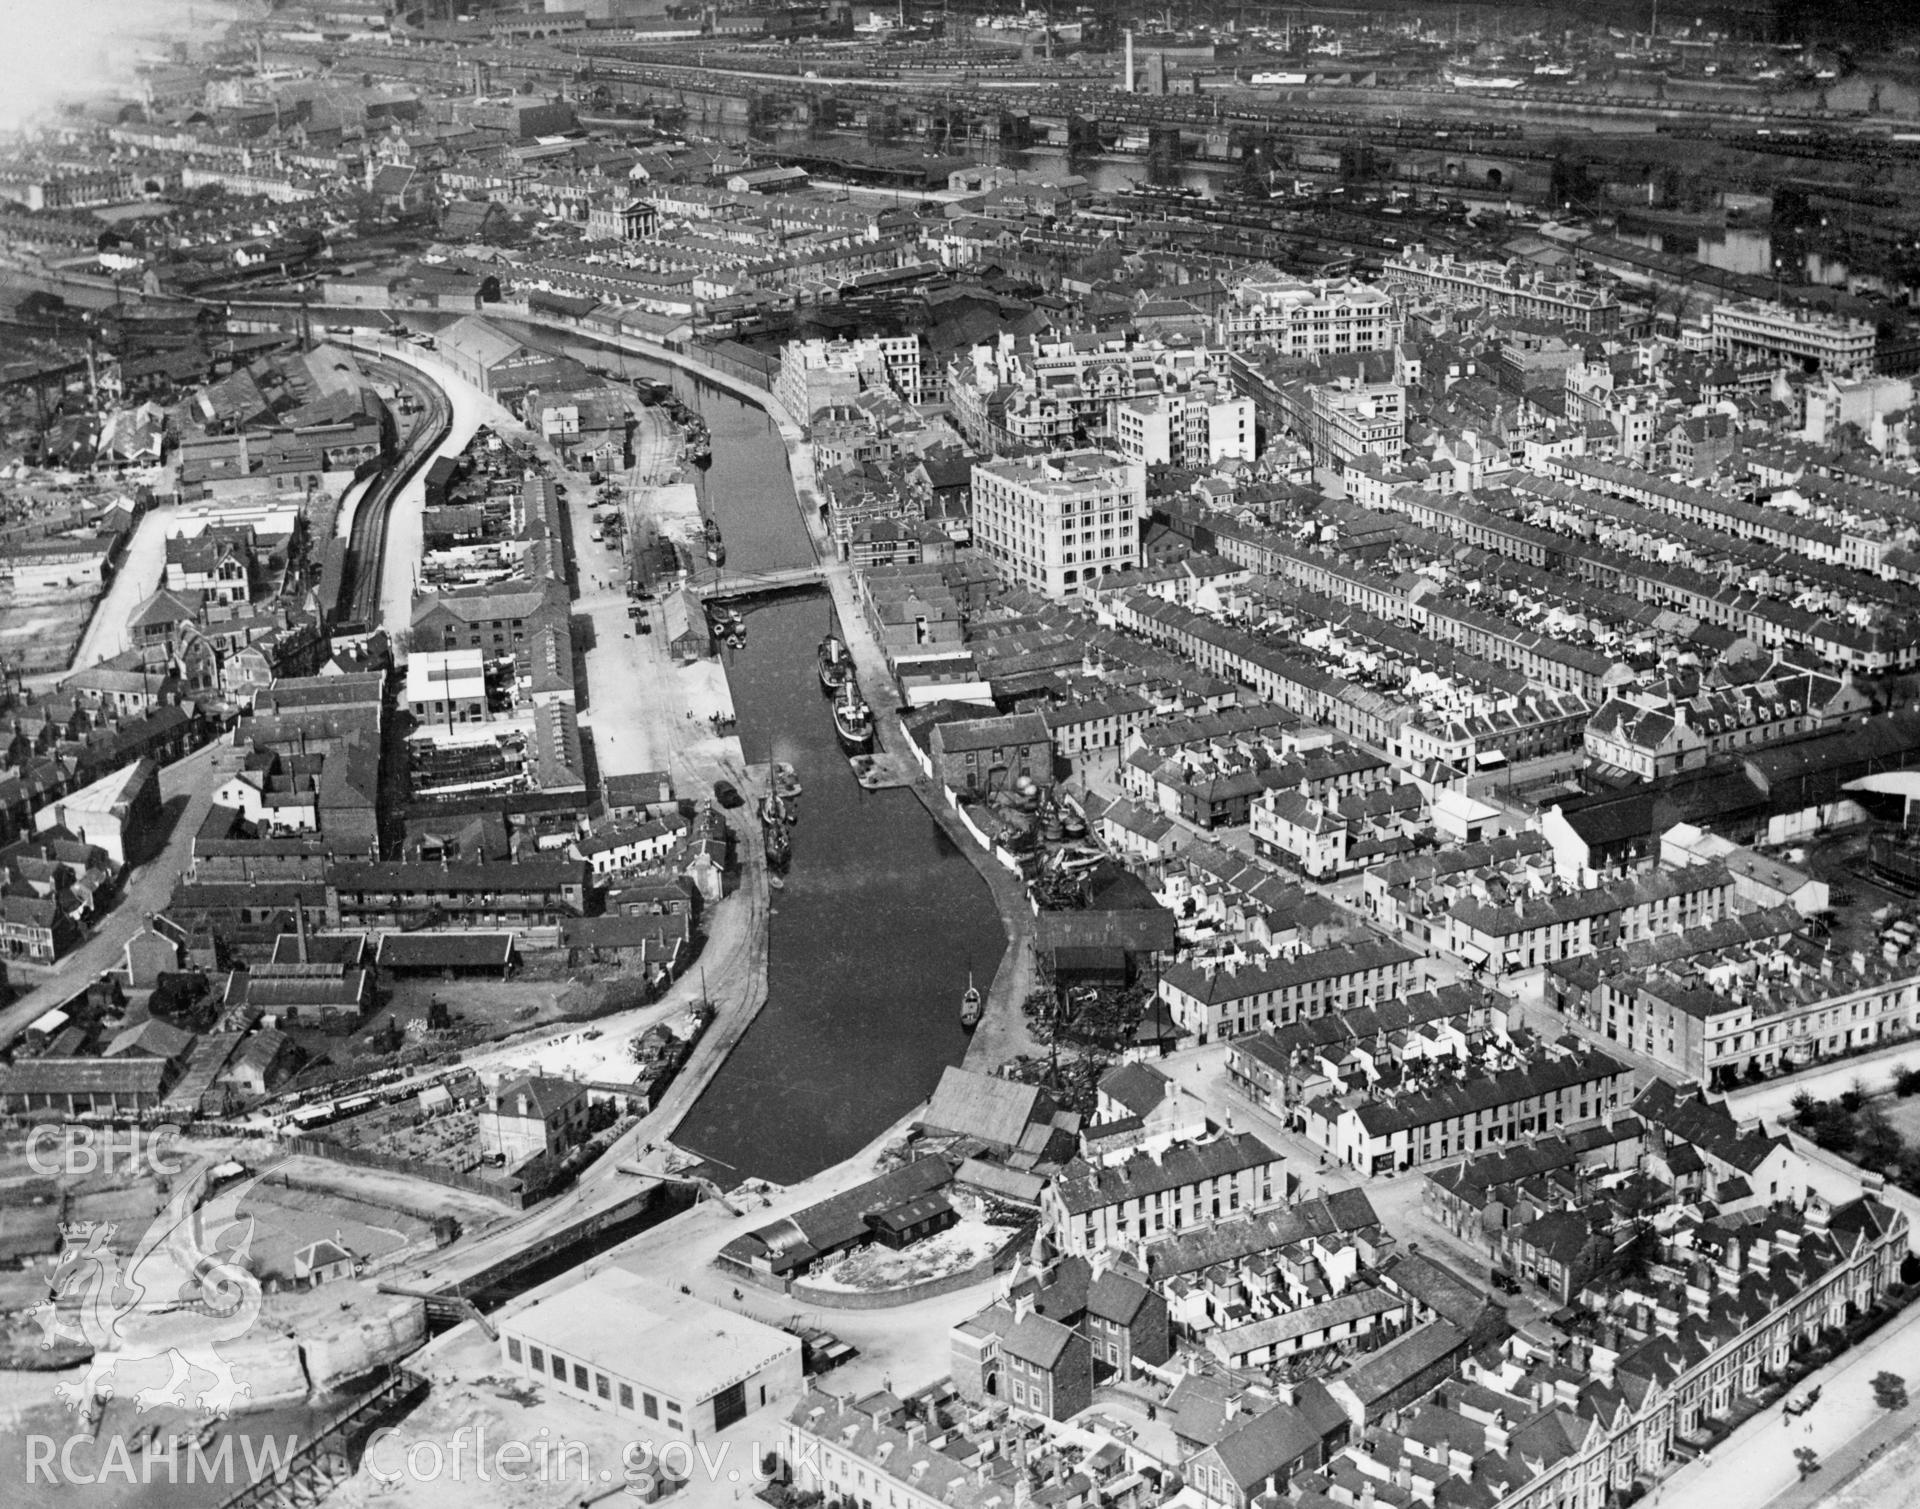 Digital copy of a black and white, oblique aerial photograph of the Glamorganshire Canal. The photograph shows a view of the Sea pound of the Glamorganshire canal in Cardiff, from the South West.